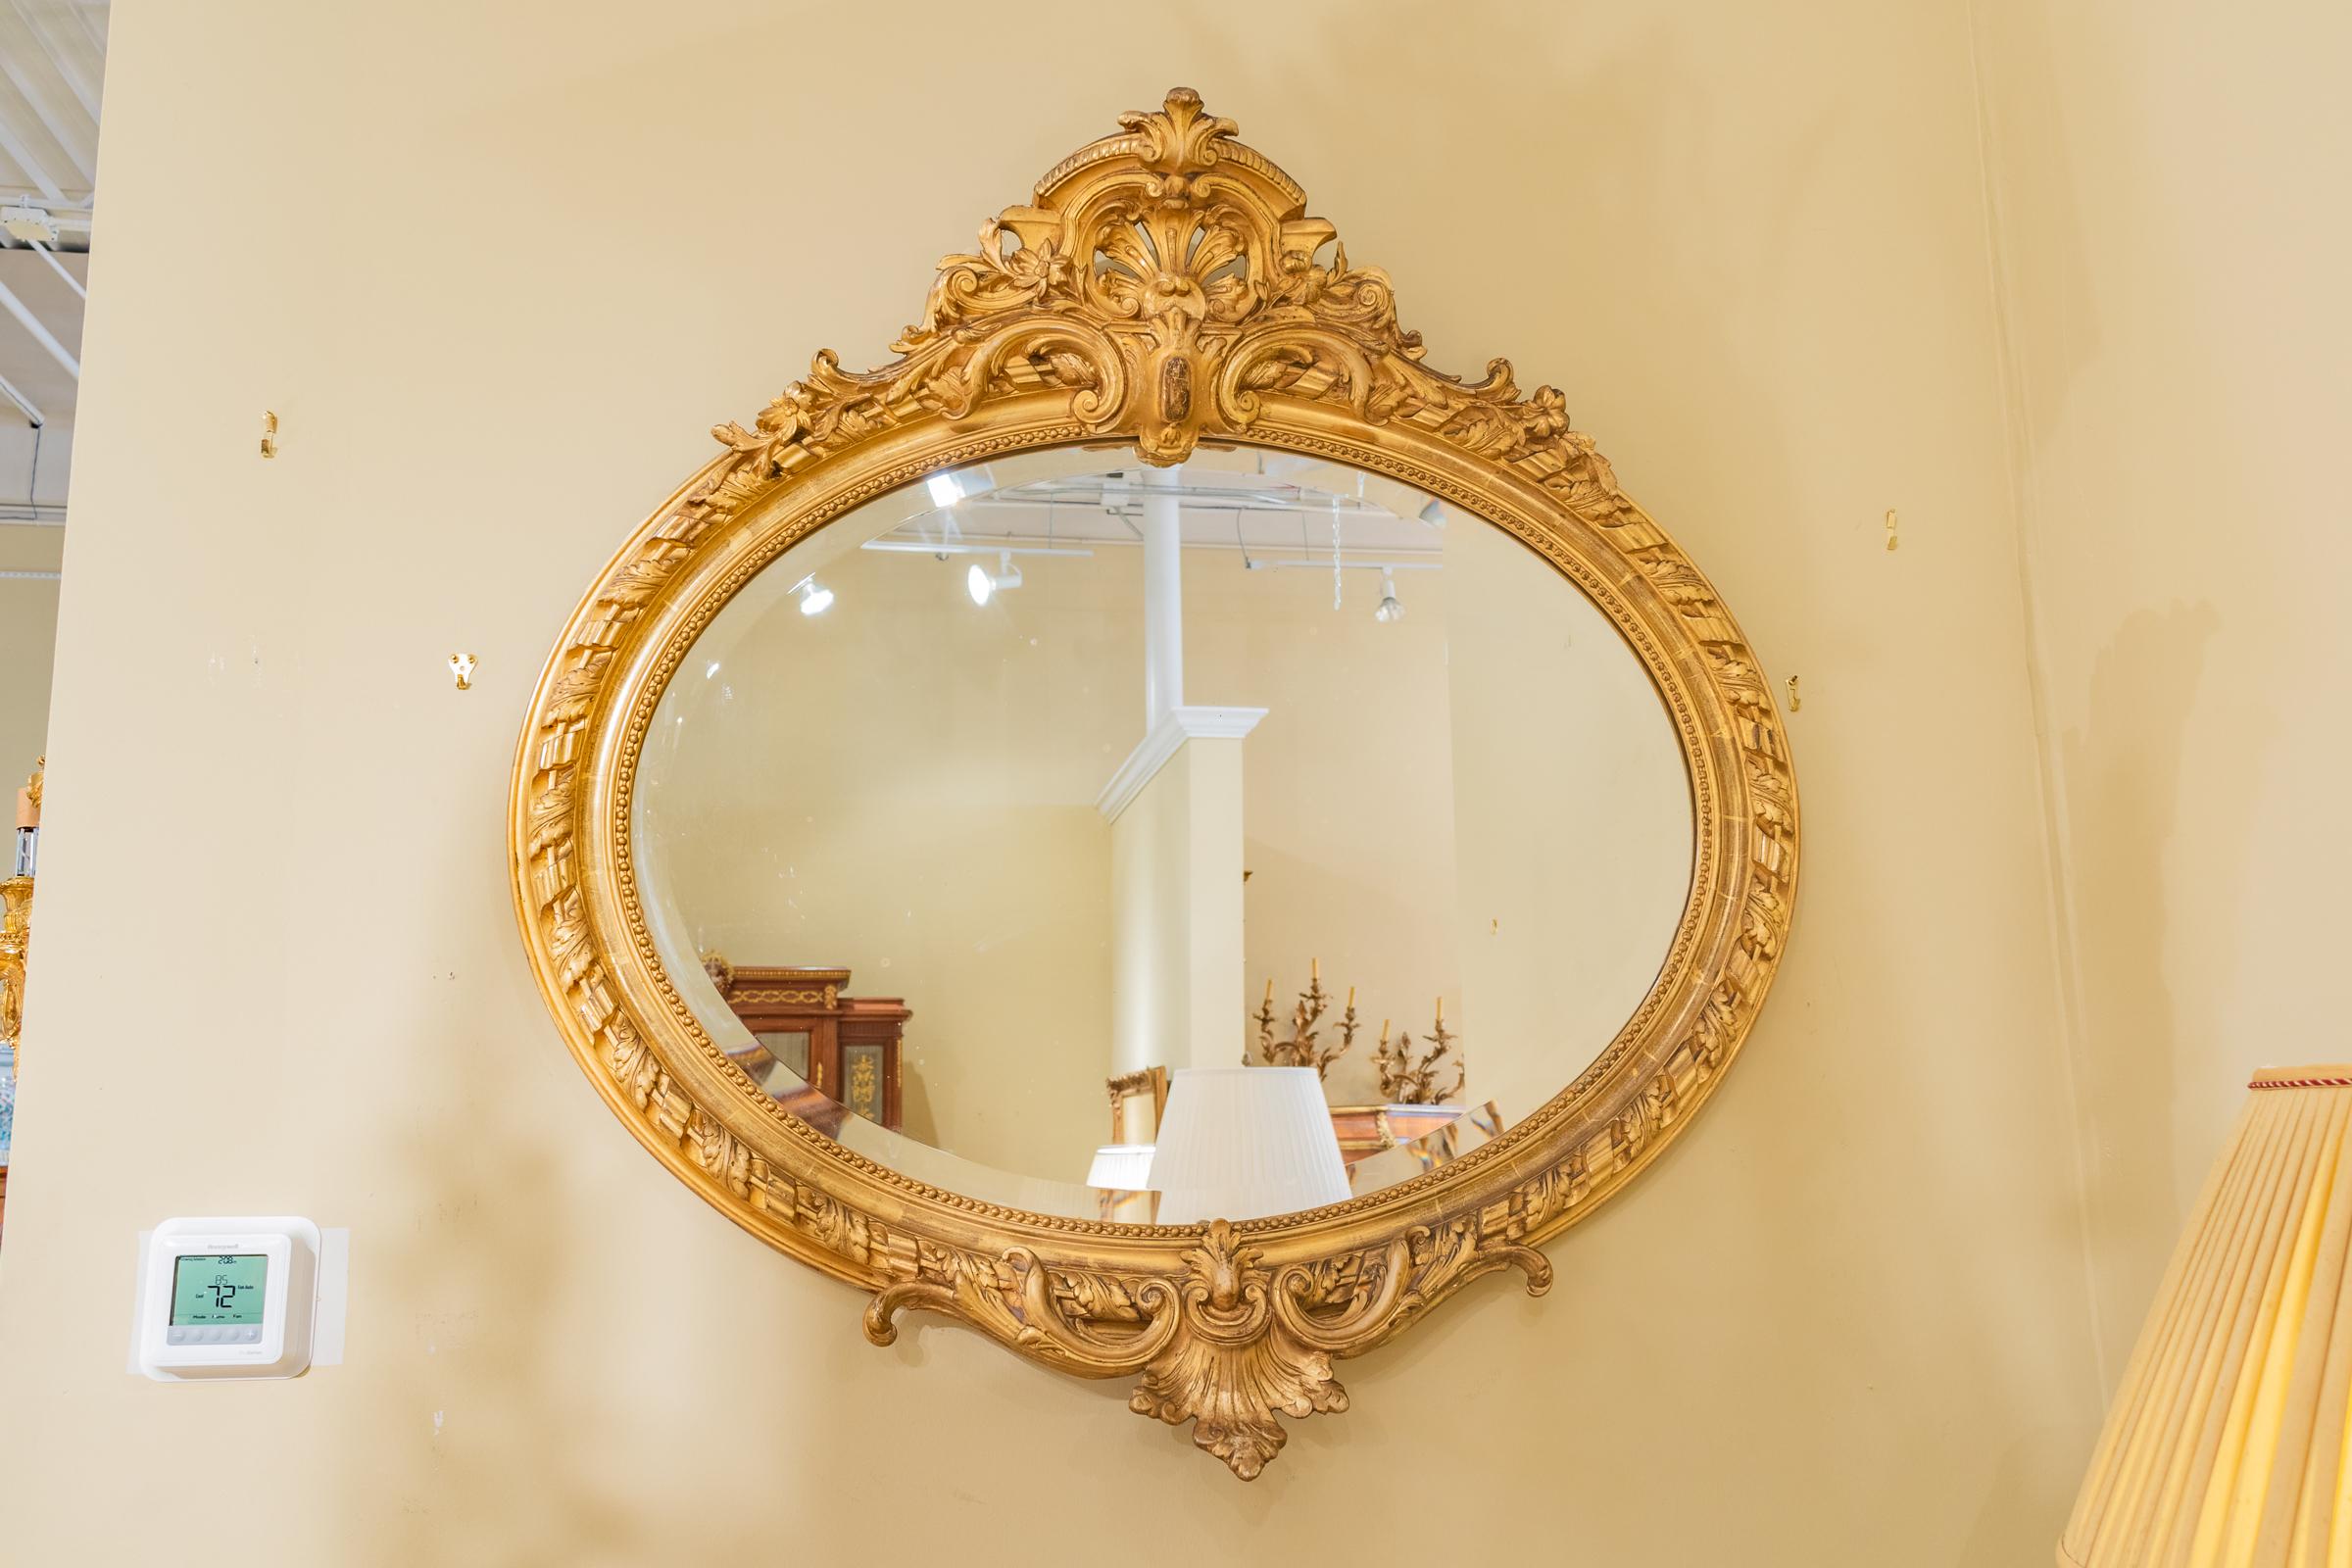 Beautifully hand carved and gilt French 19th century Louis XV oval mantel (fireplace) mirror. Beveled glass with fine detailed carving. Water gilding still evident on the carving.